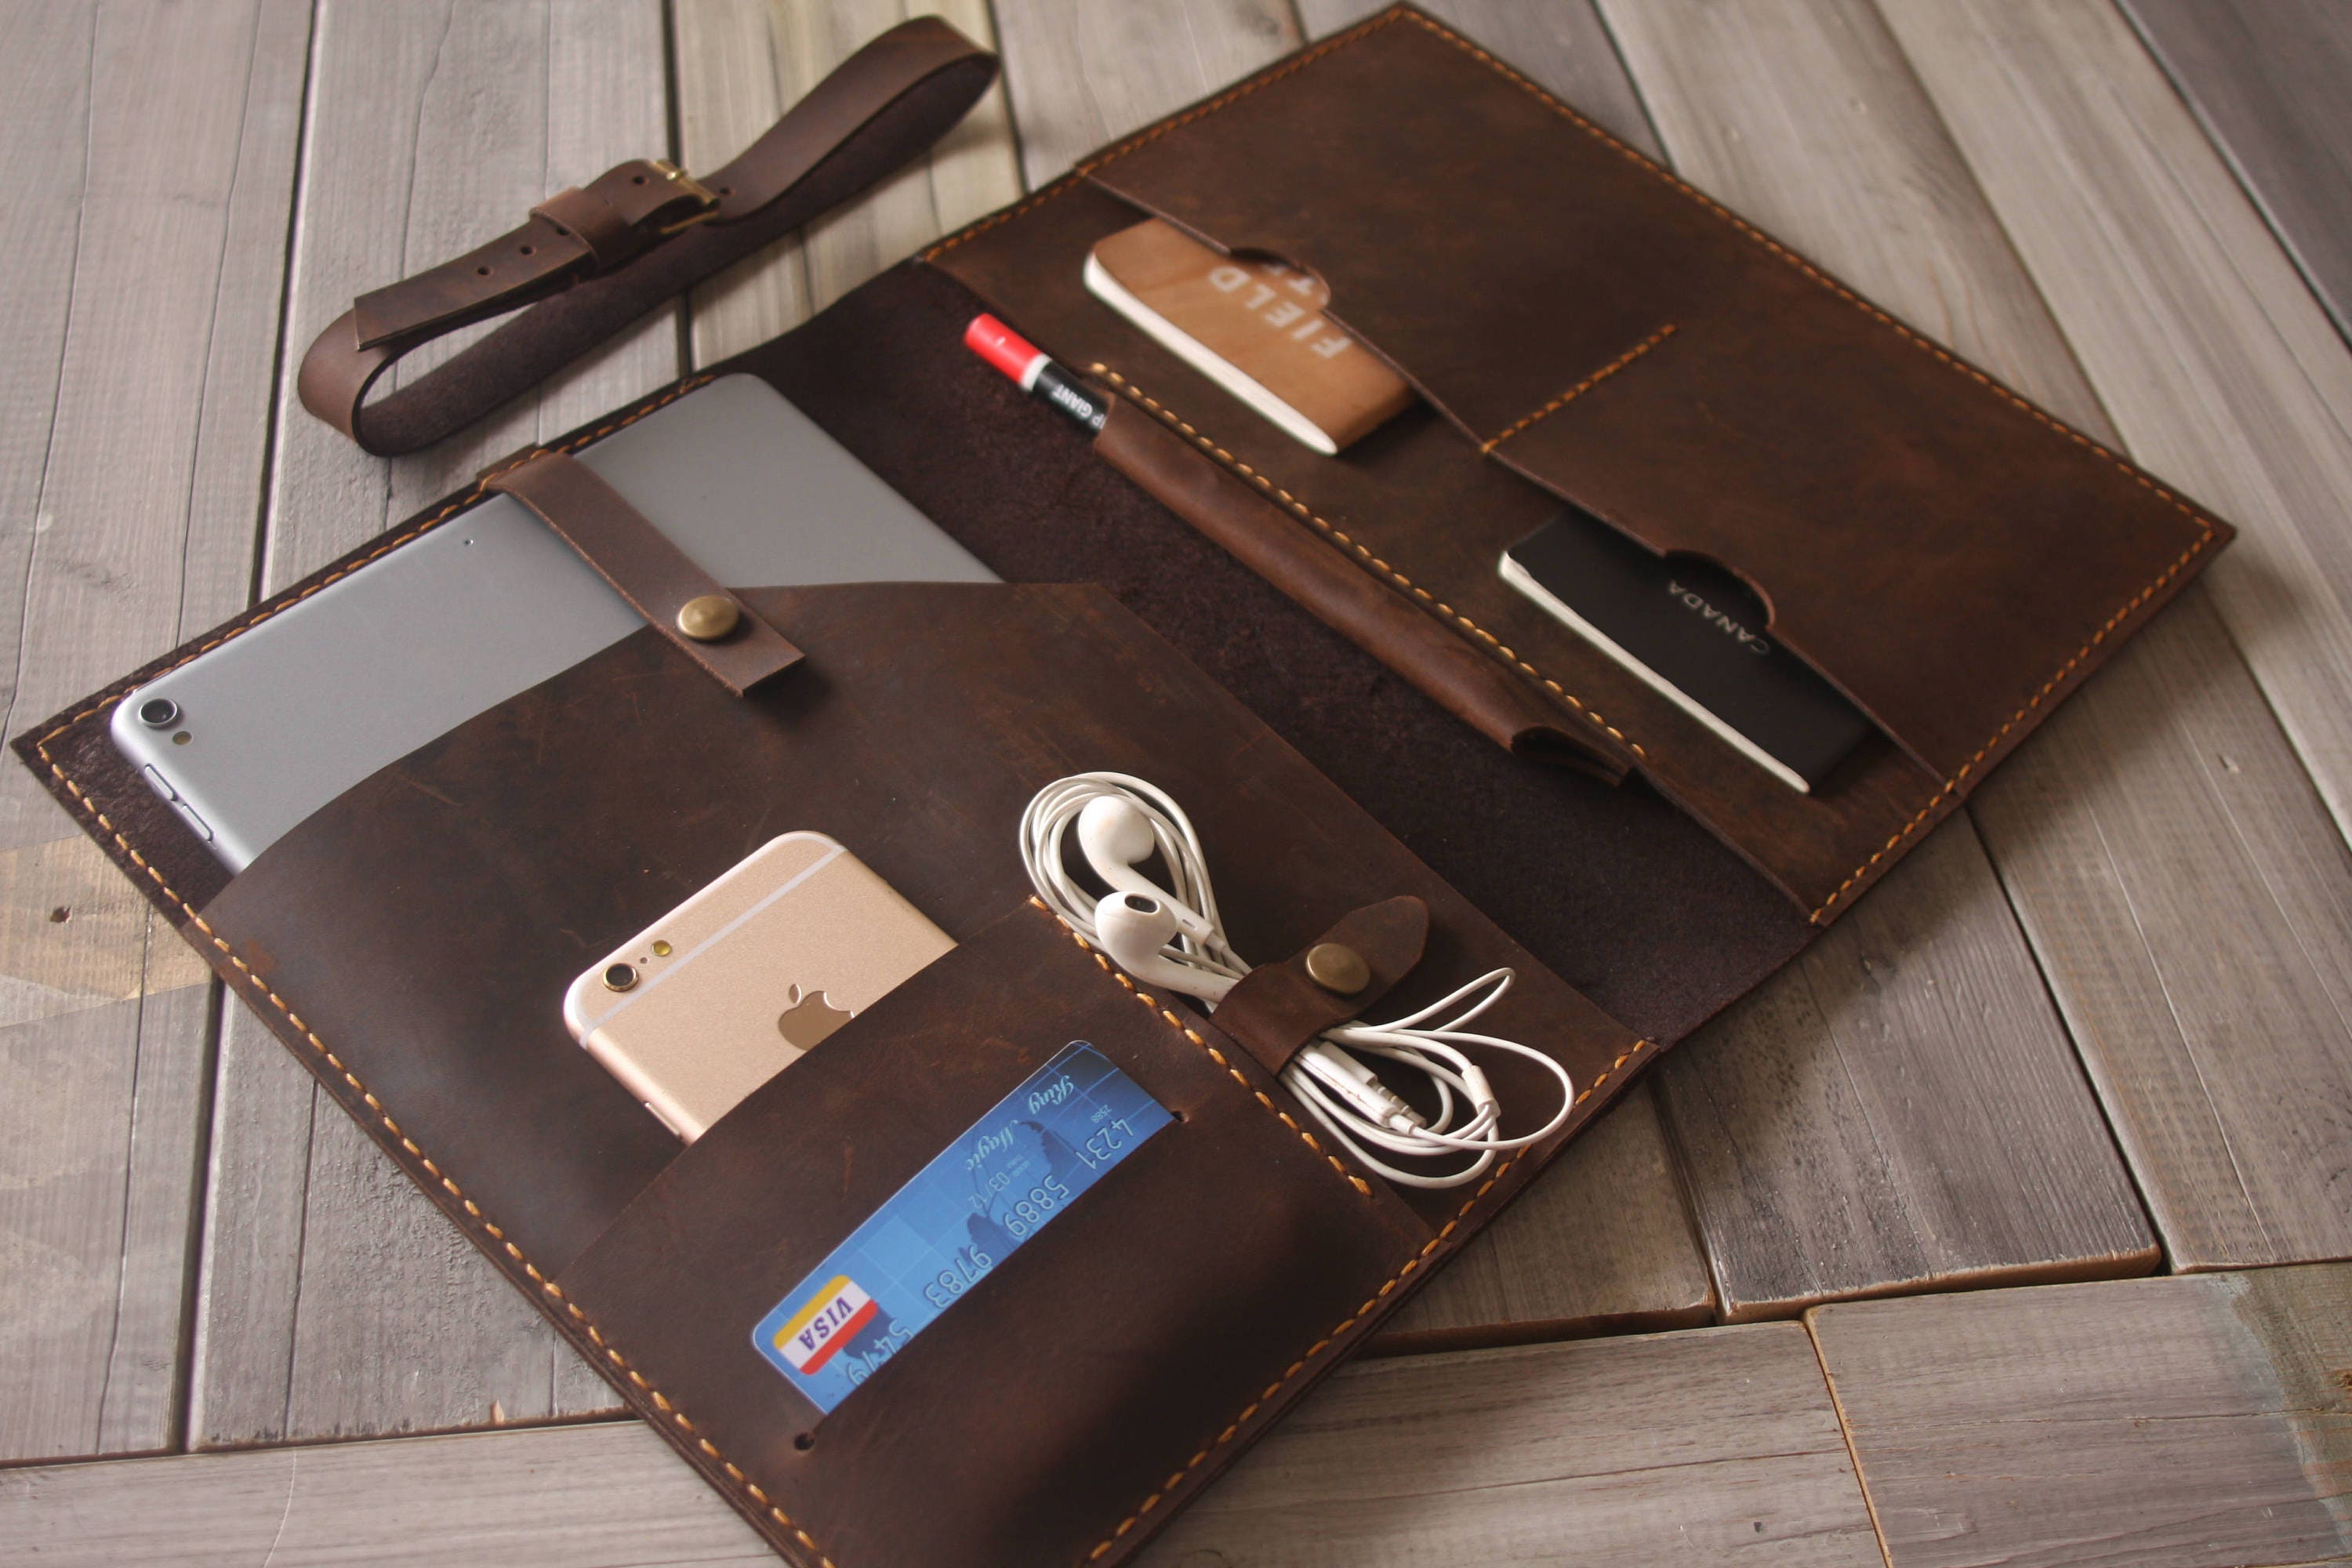 7 Best Corporate Leather Gift Ideas for Employees - iPromo Blog